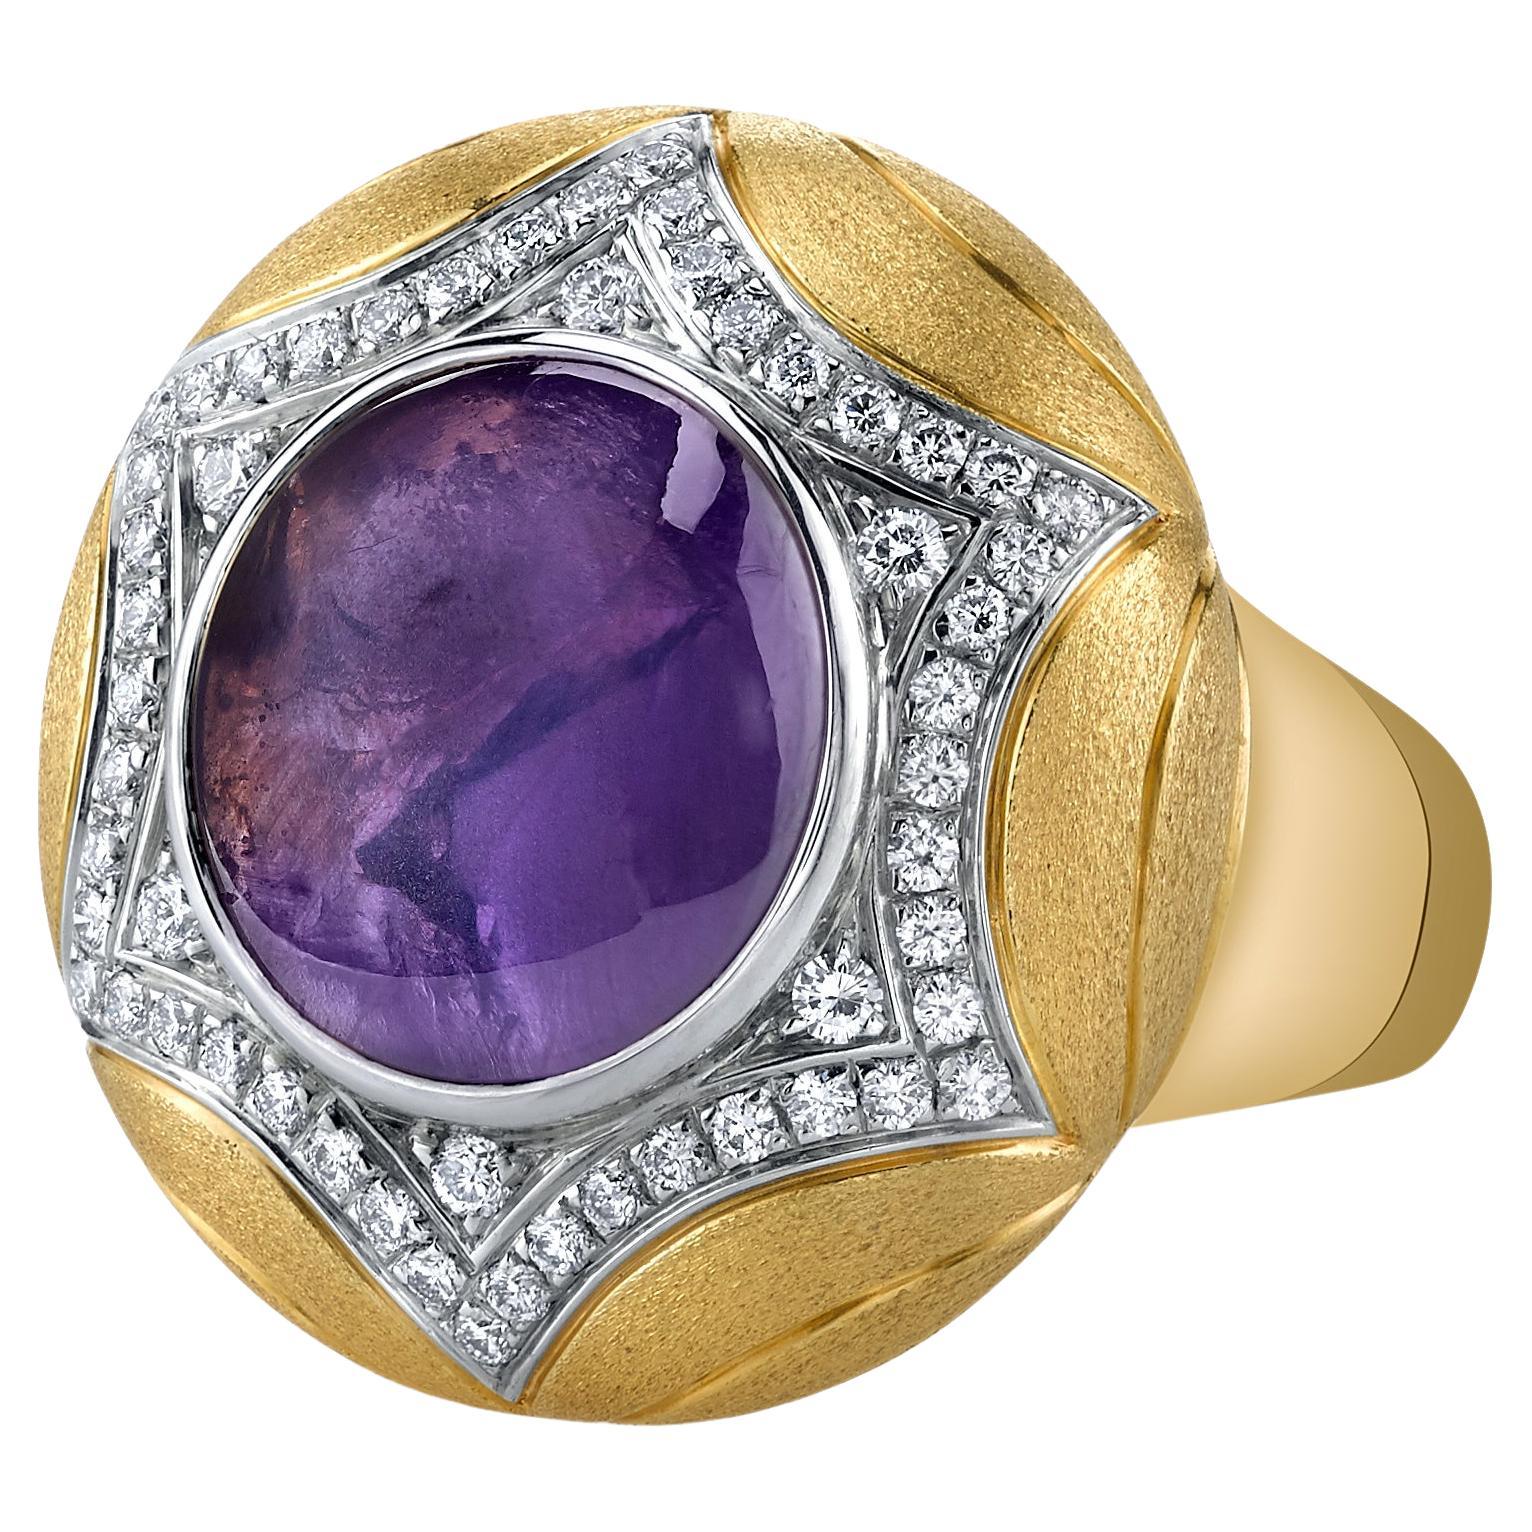 This impressive, one-of-a-kind star sapphire ring packs a 